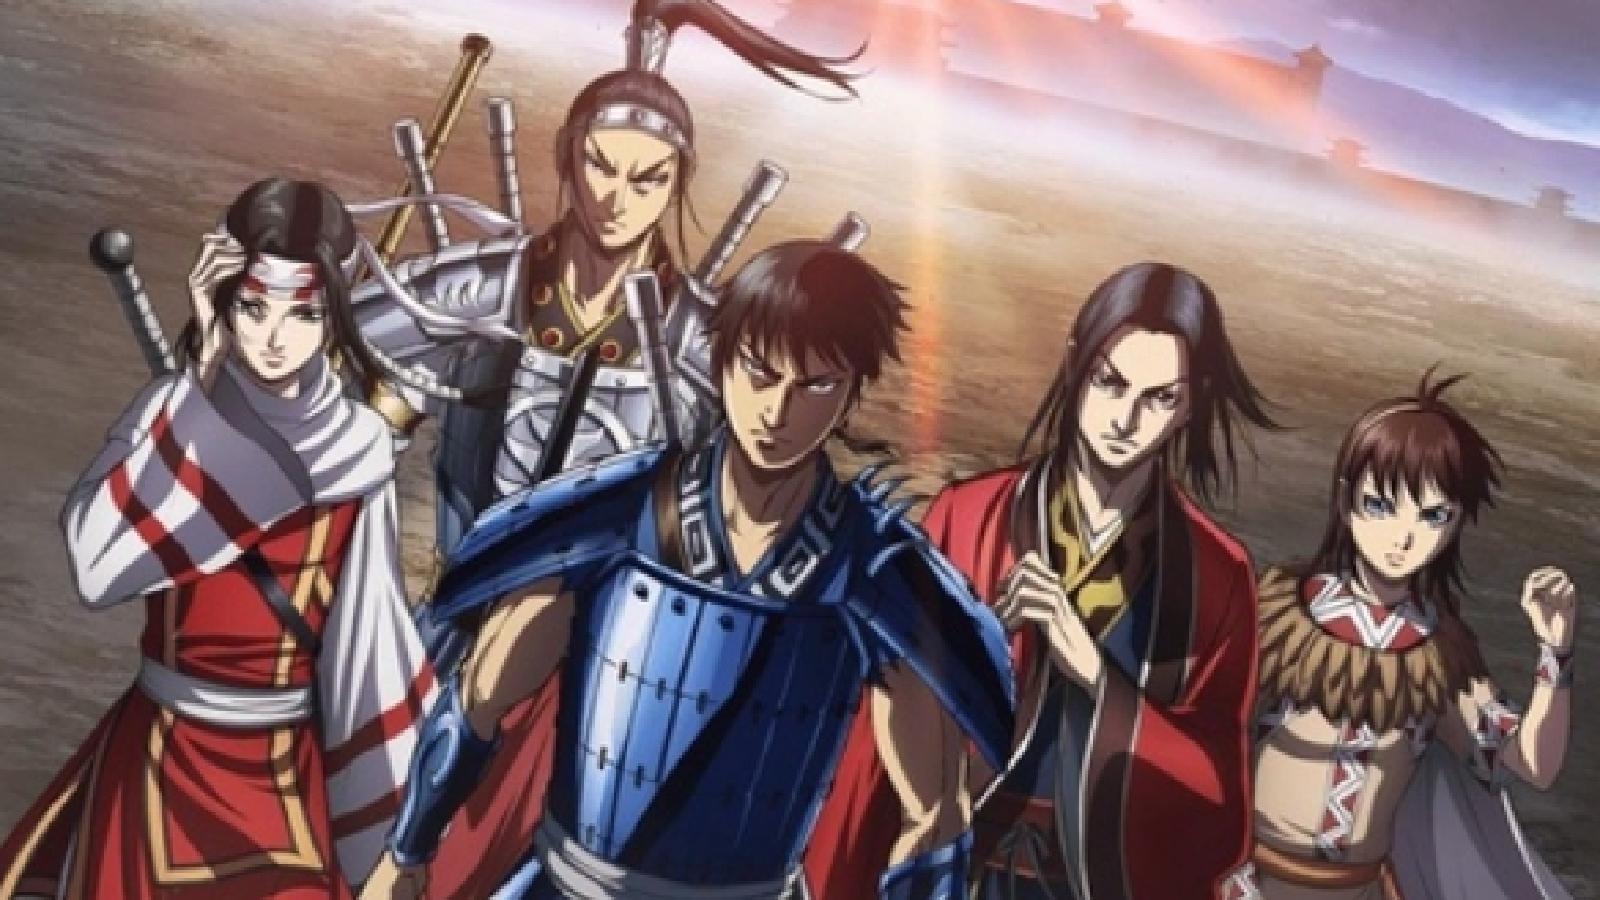 Kingdom anime official poster featuring the Qin army